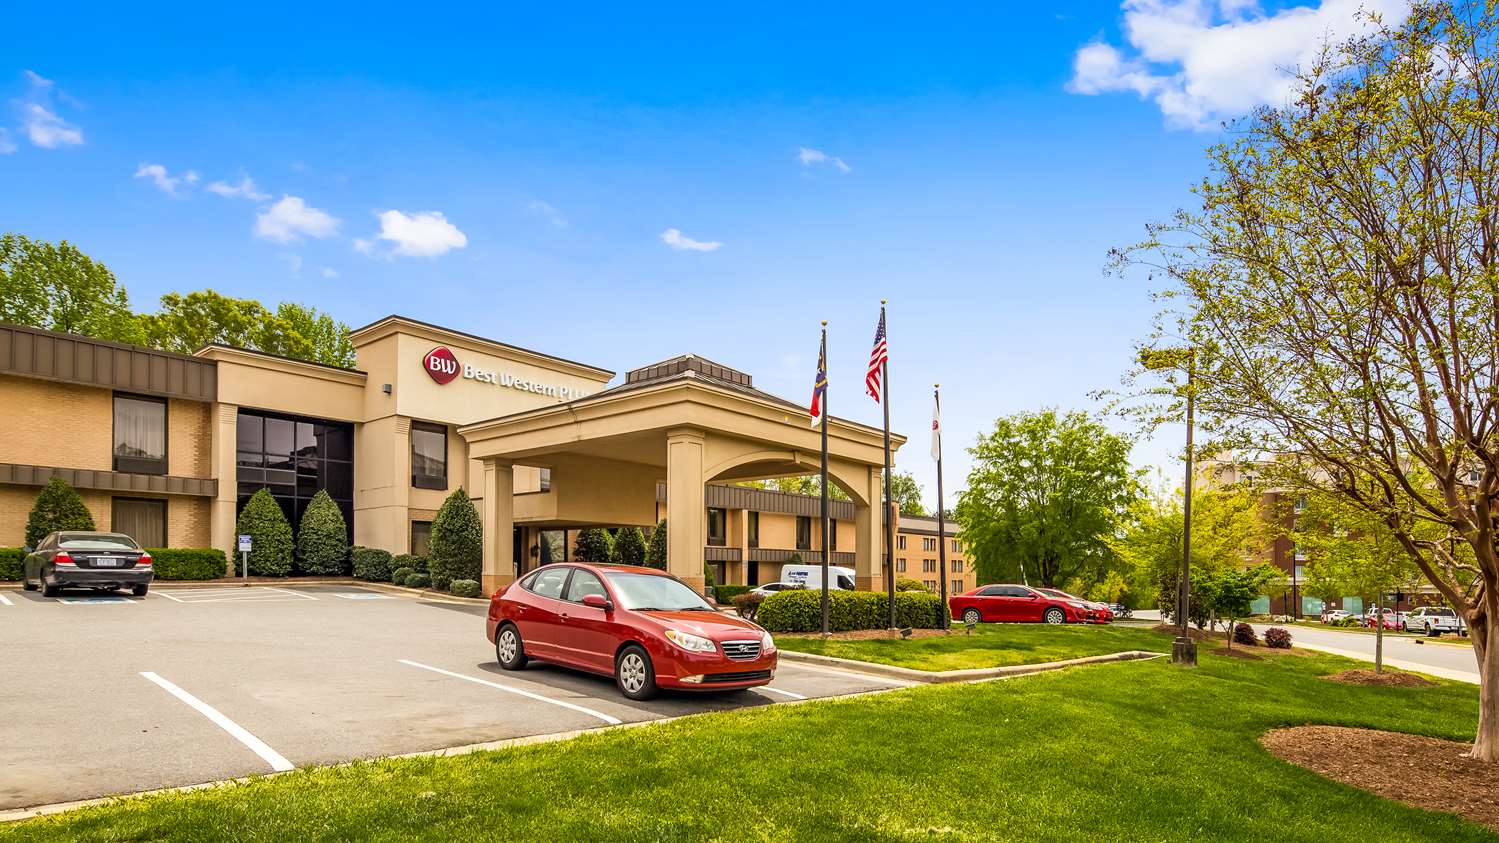 Hotels In Cary Nc Best Western Plus Cary Inn Nc State Cary Hotels